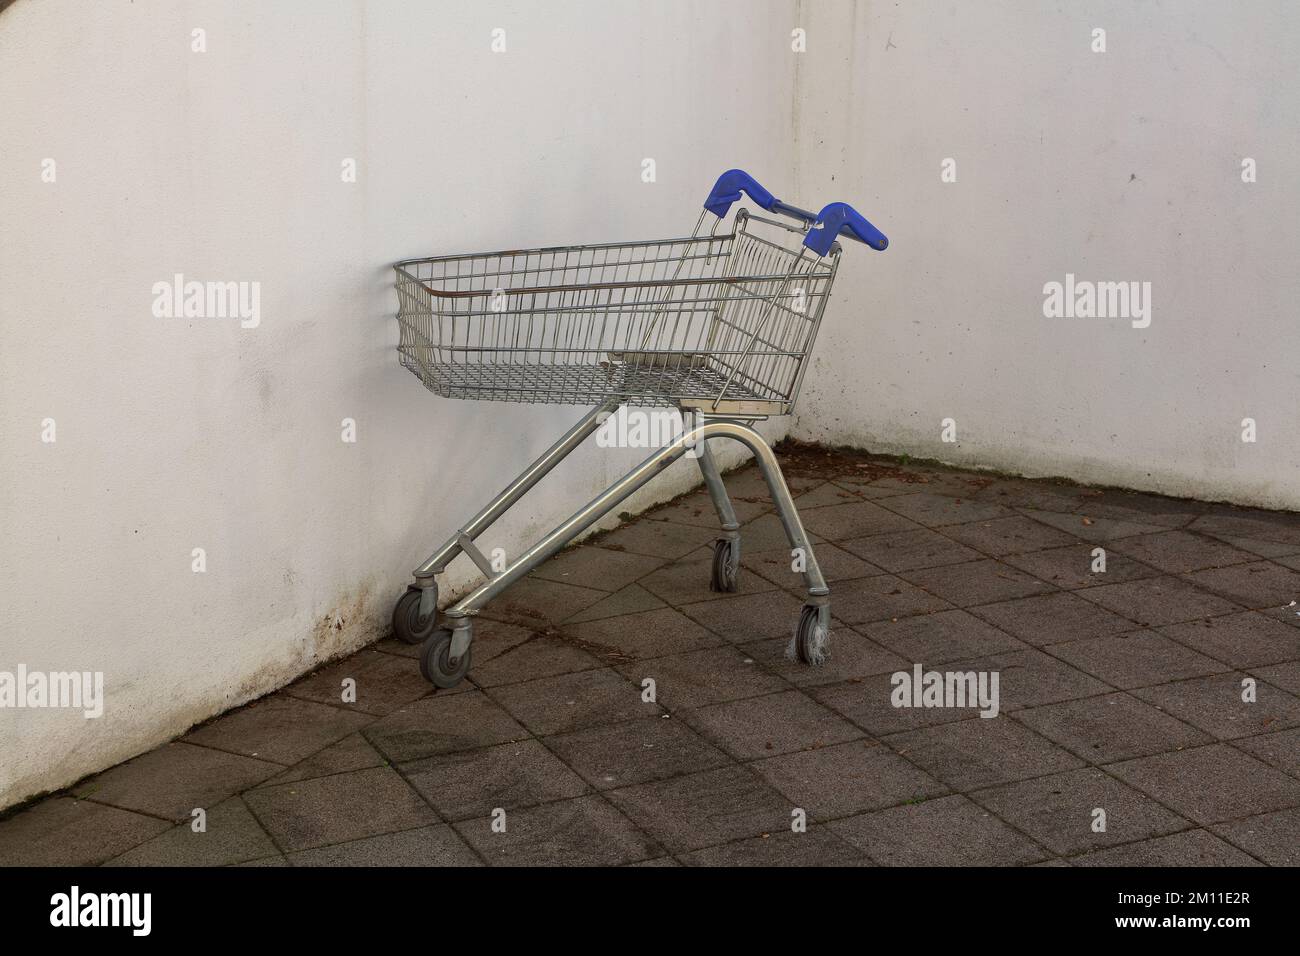 The good old shopping trolley from a local supermarket just abandoned in a corner some distance from the place of origin. Stock Photo